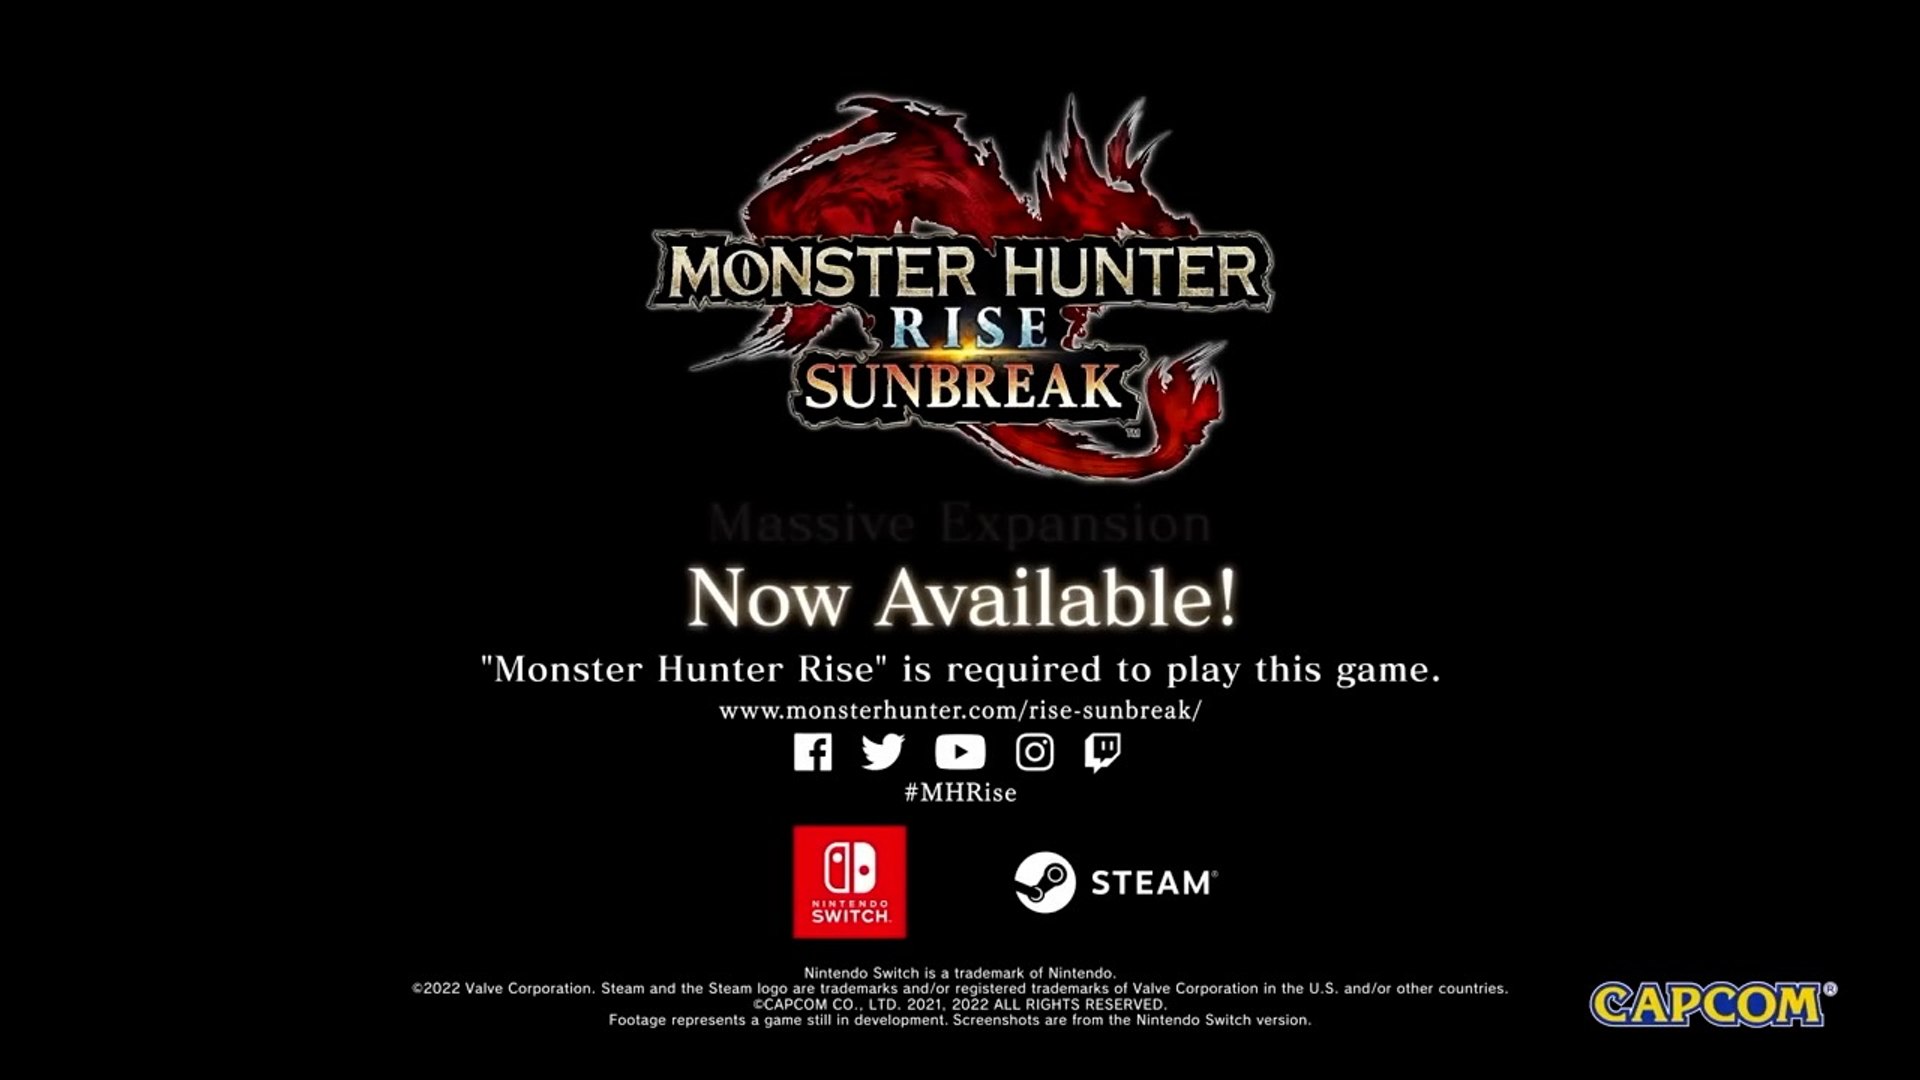 Monster Hunter Rise: Sunbreak is a 'massive' expansion for Switch